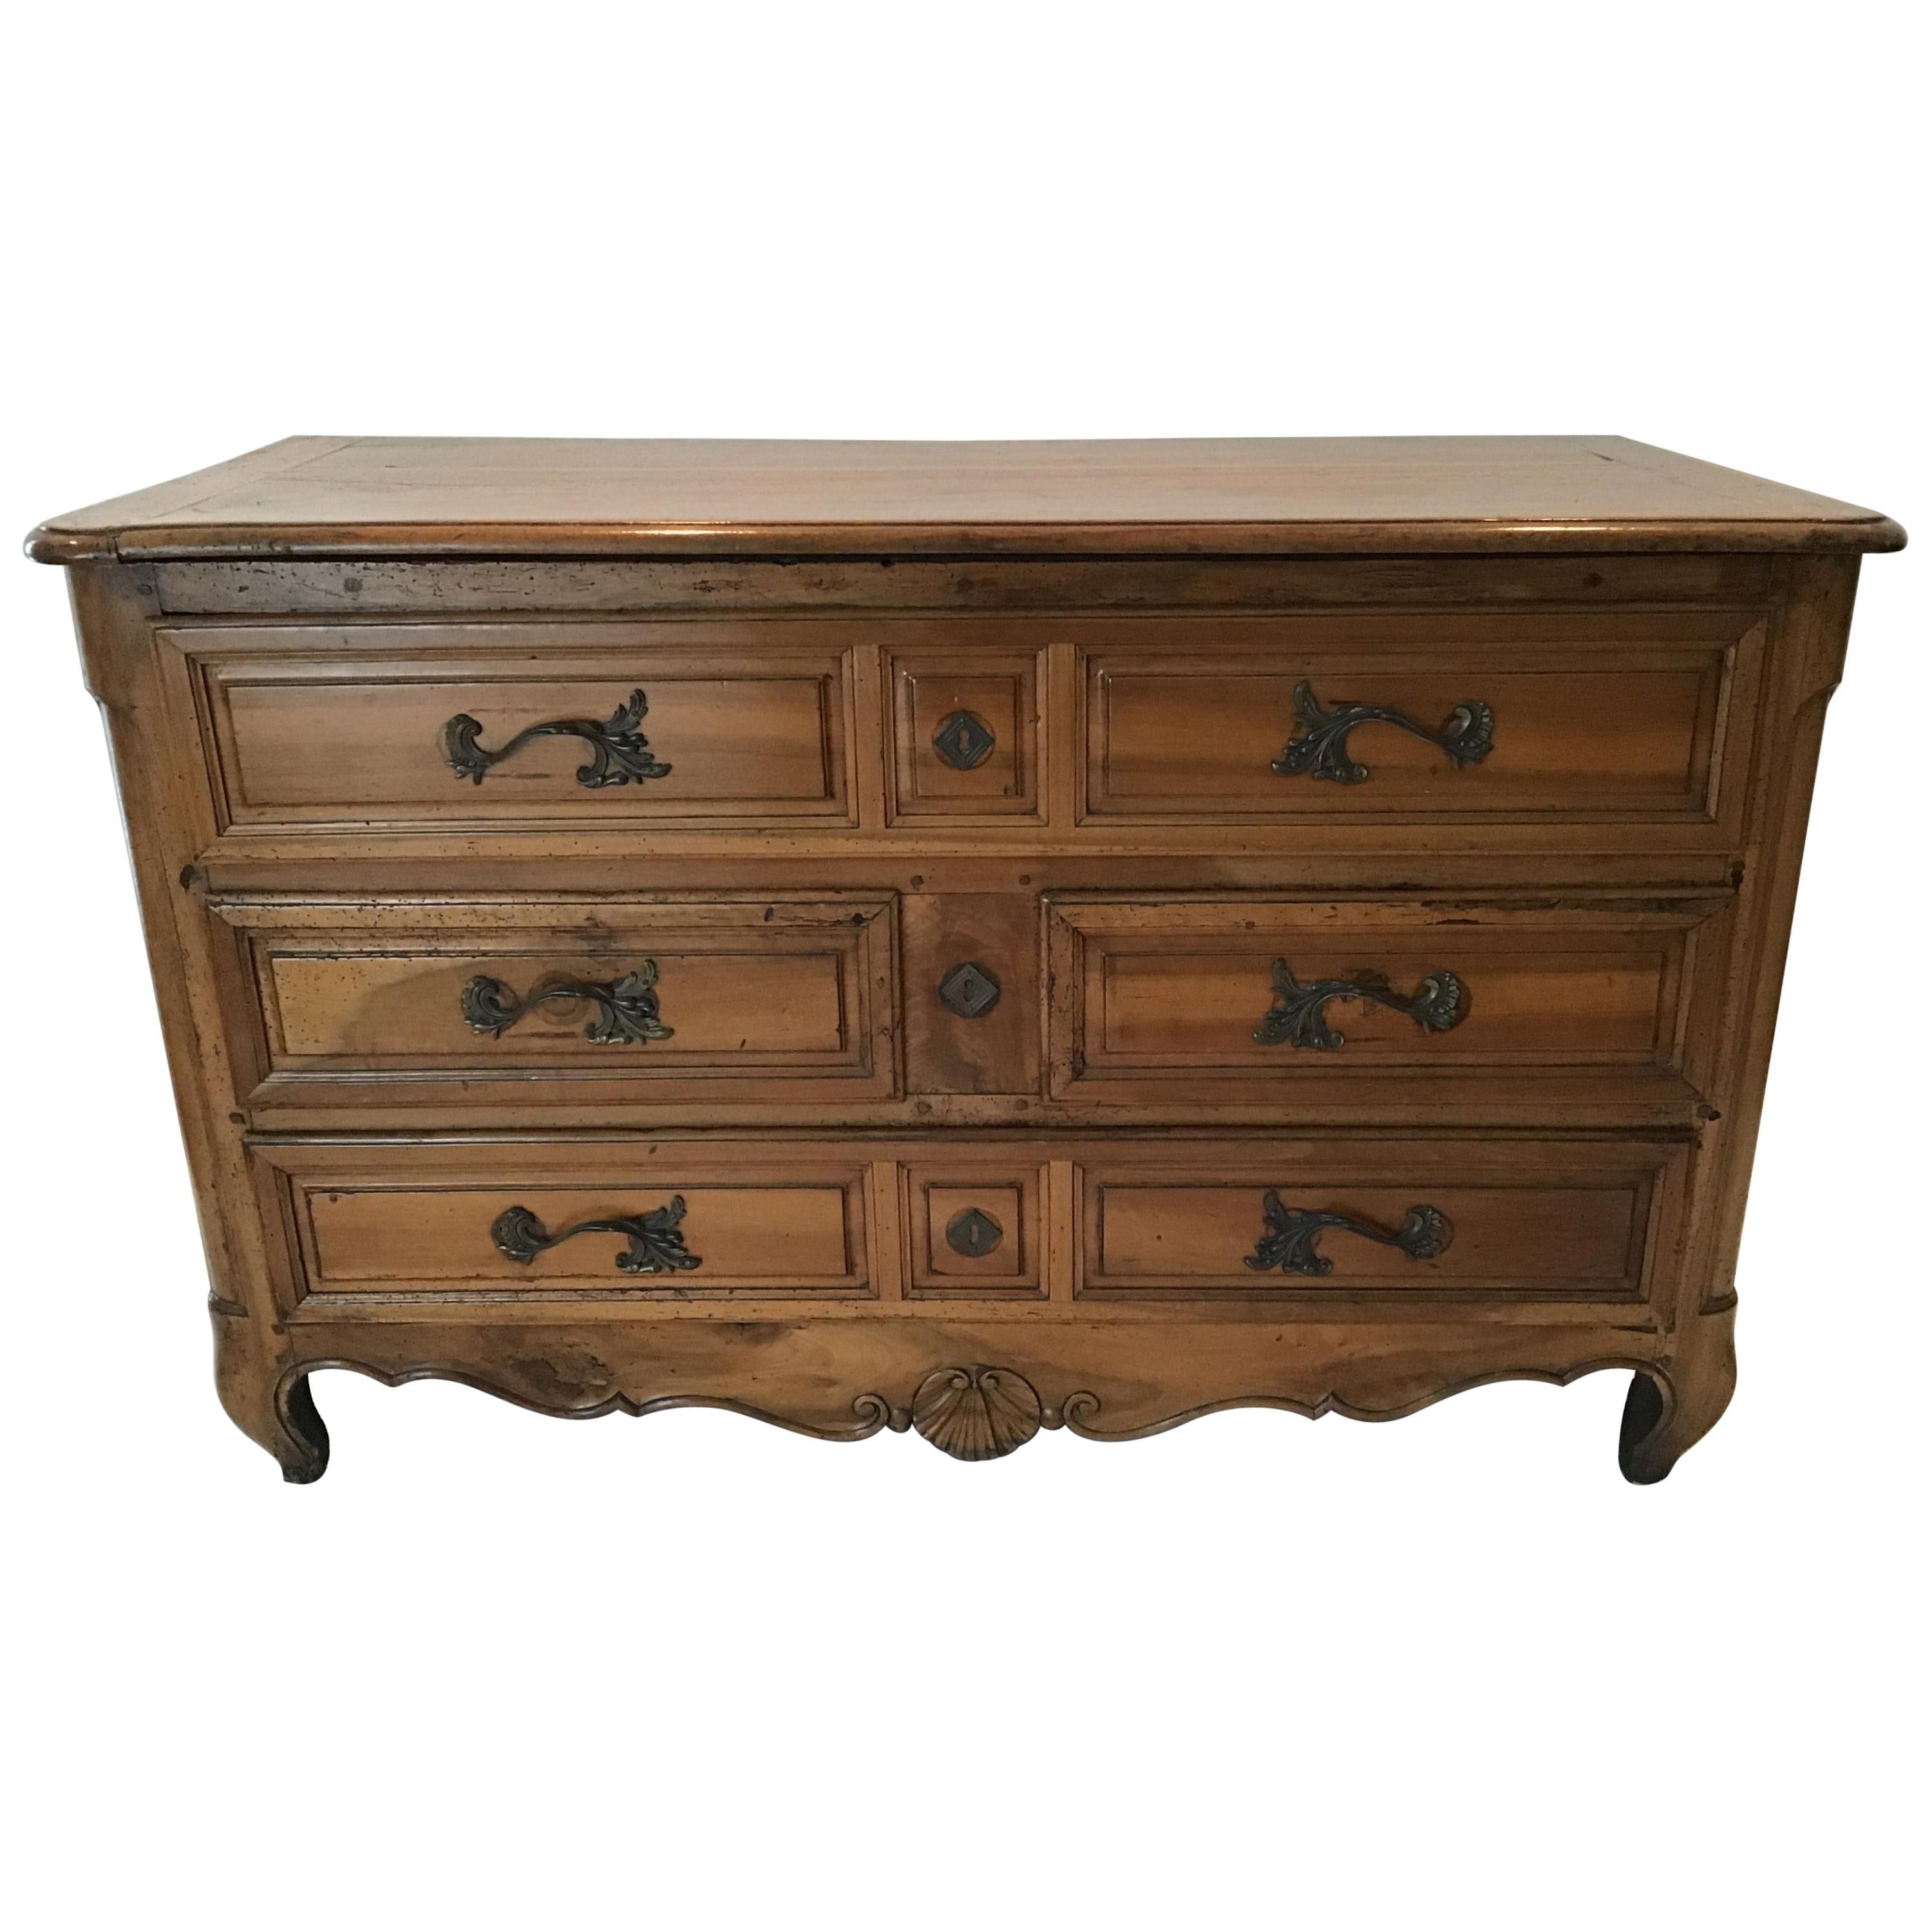 1840s French Provincial Louis XV Chest of Drawers